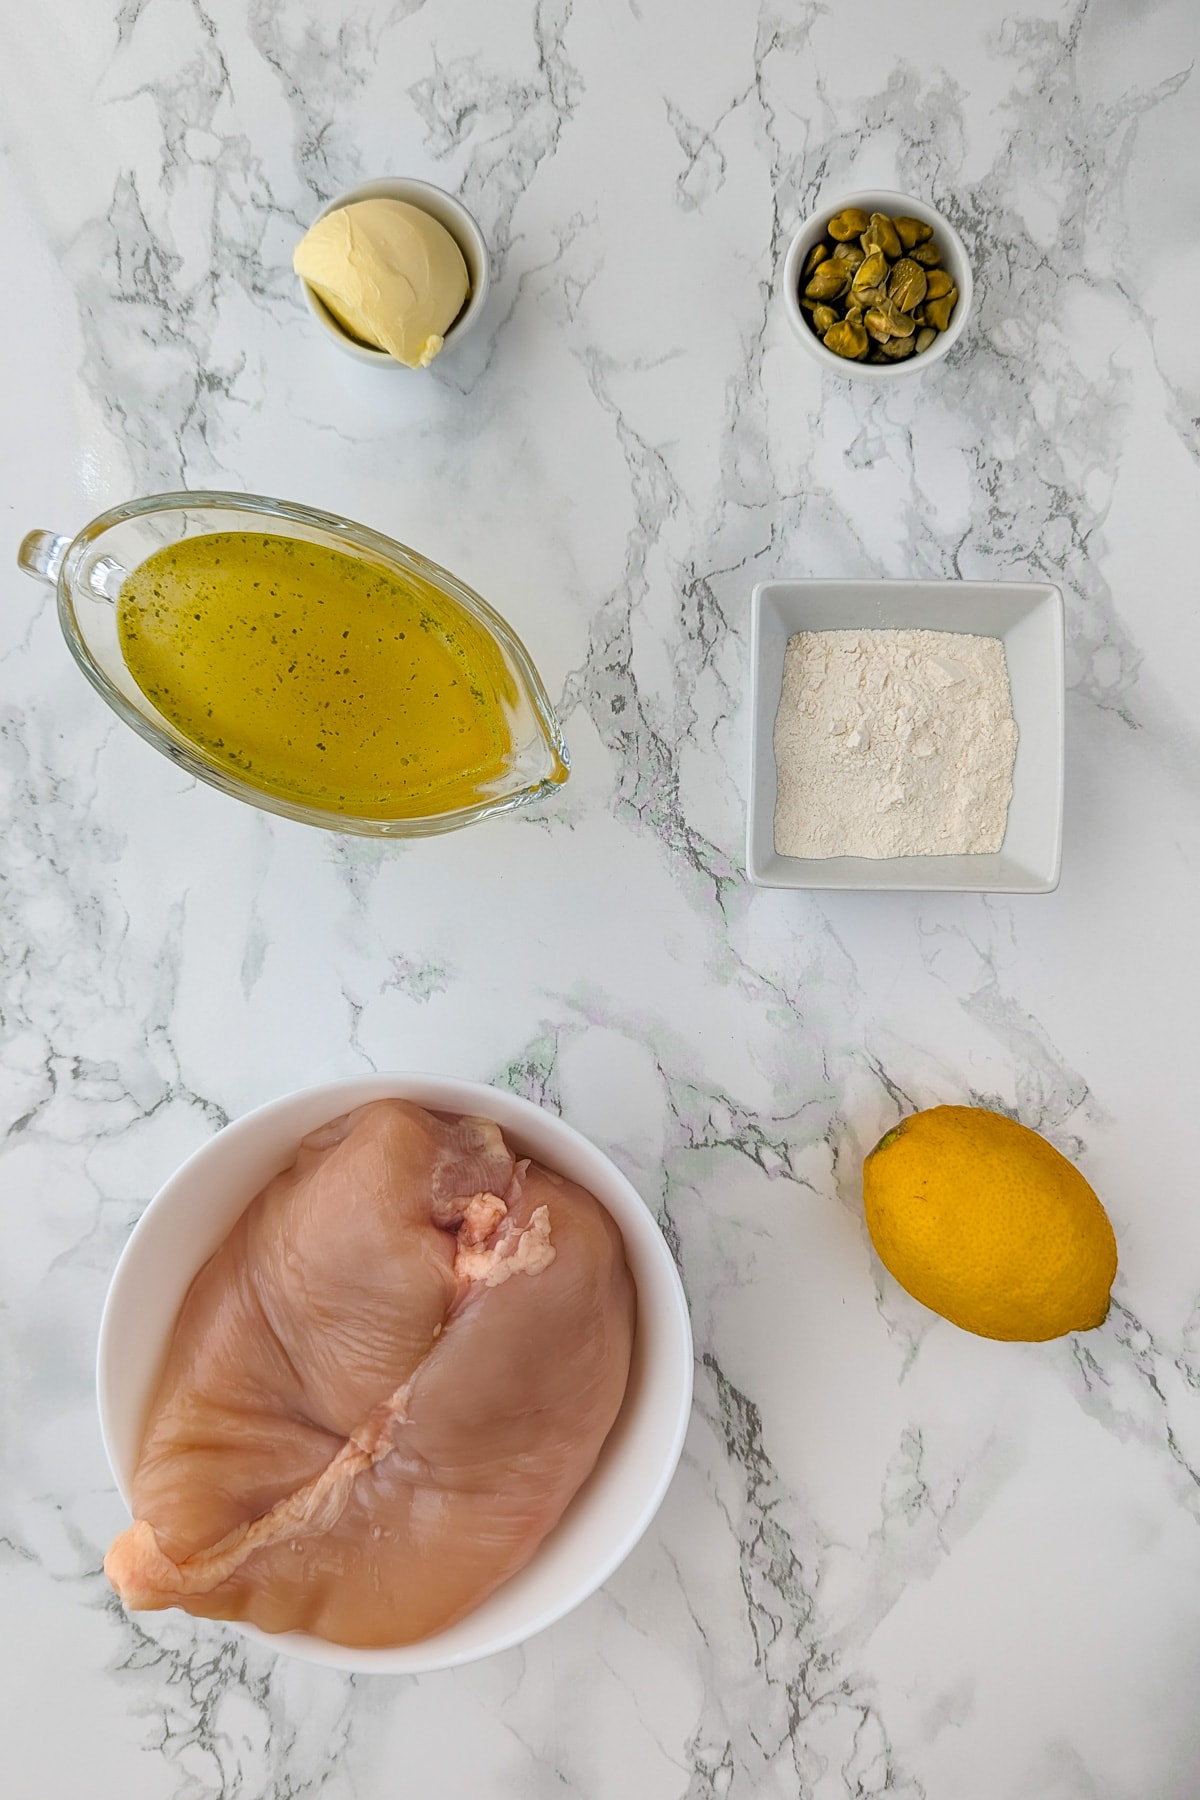 Ingredients for chicken piccata neatly arranged on a marble countertop, including raw chicken breasts, lemon, capers, butter, flour, and a jug of broth.